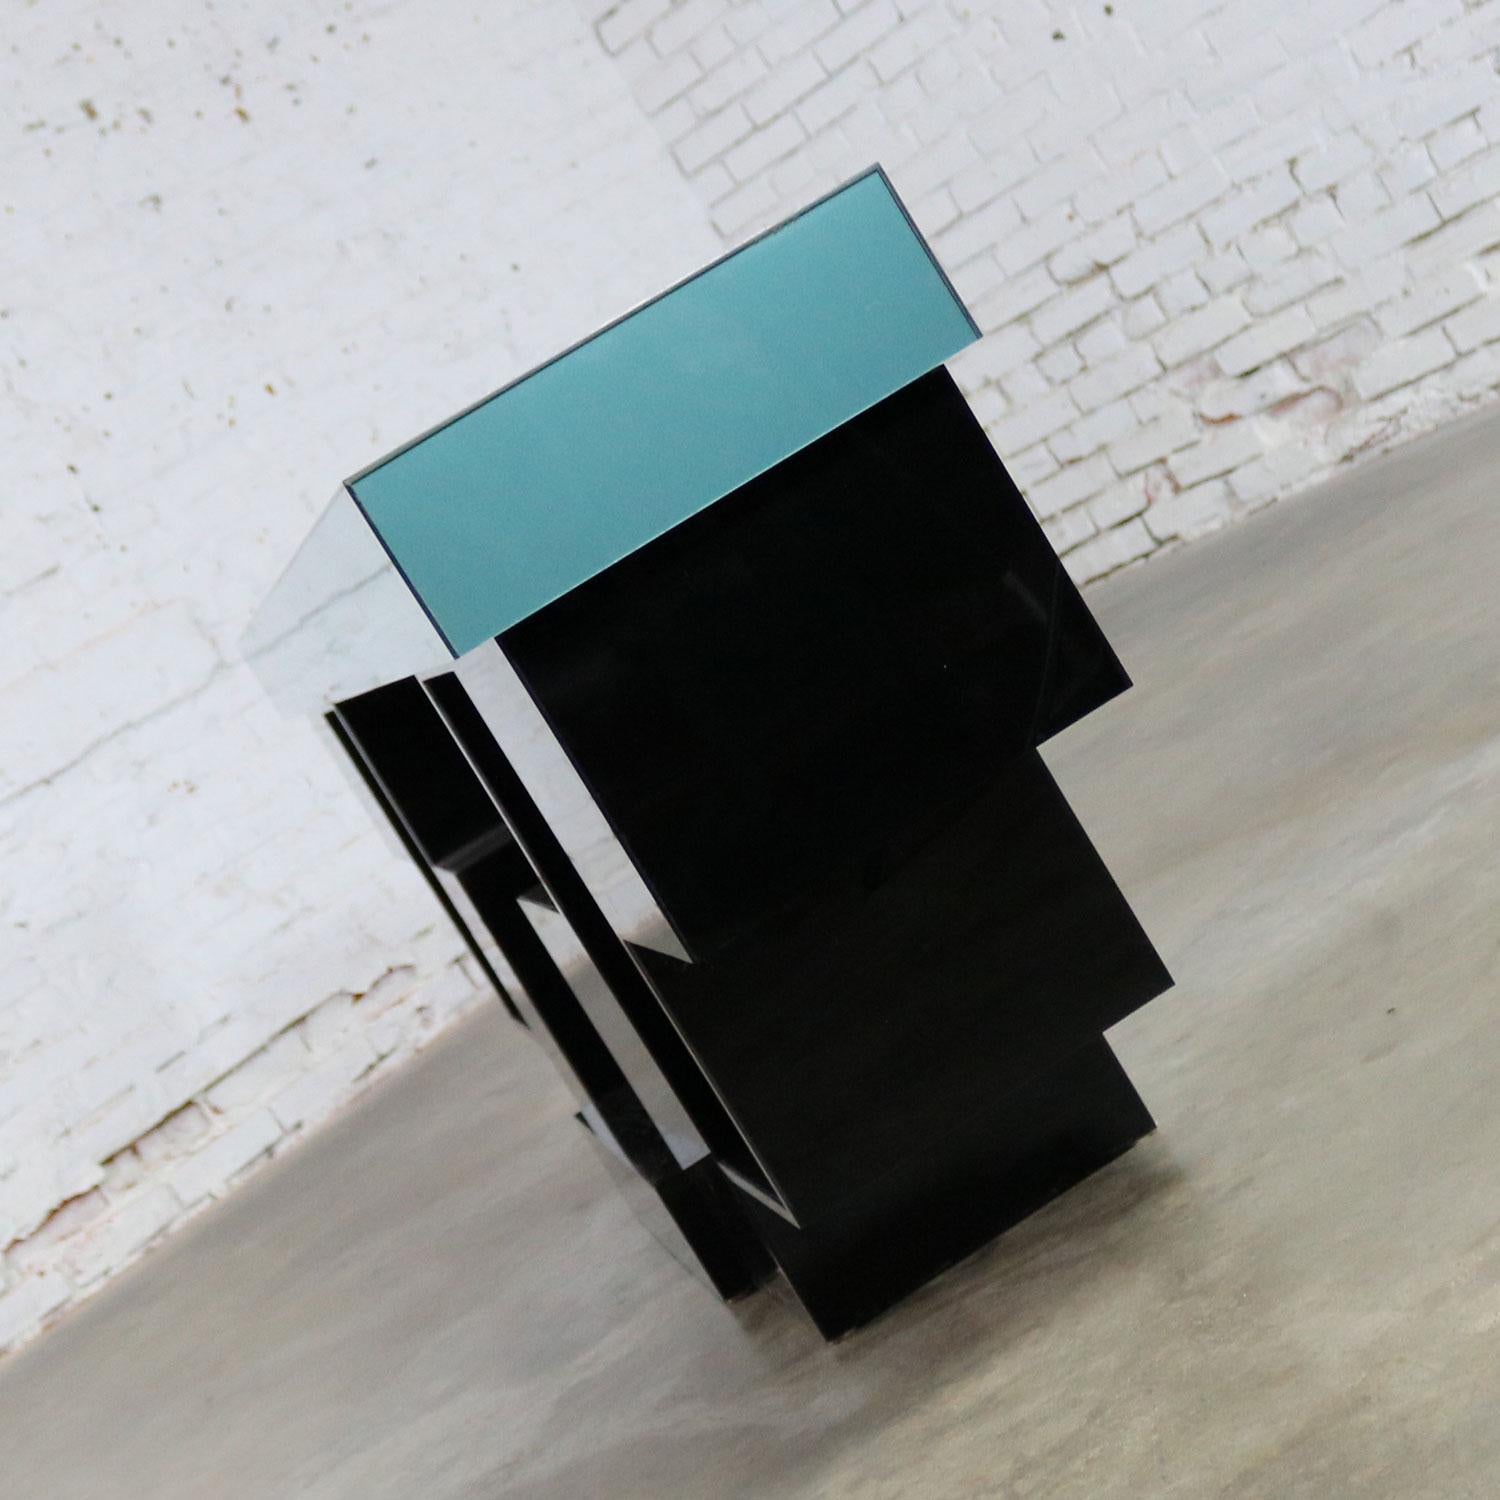 Modern Zig Zag Stepped Plexiglass Clad Console Table Credenza in Black and Teal In Good Condition For Sale In Topeka, KS